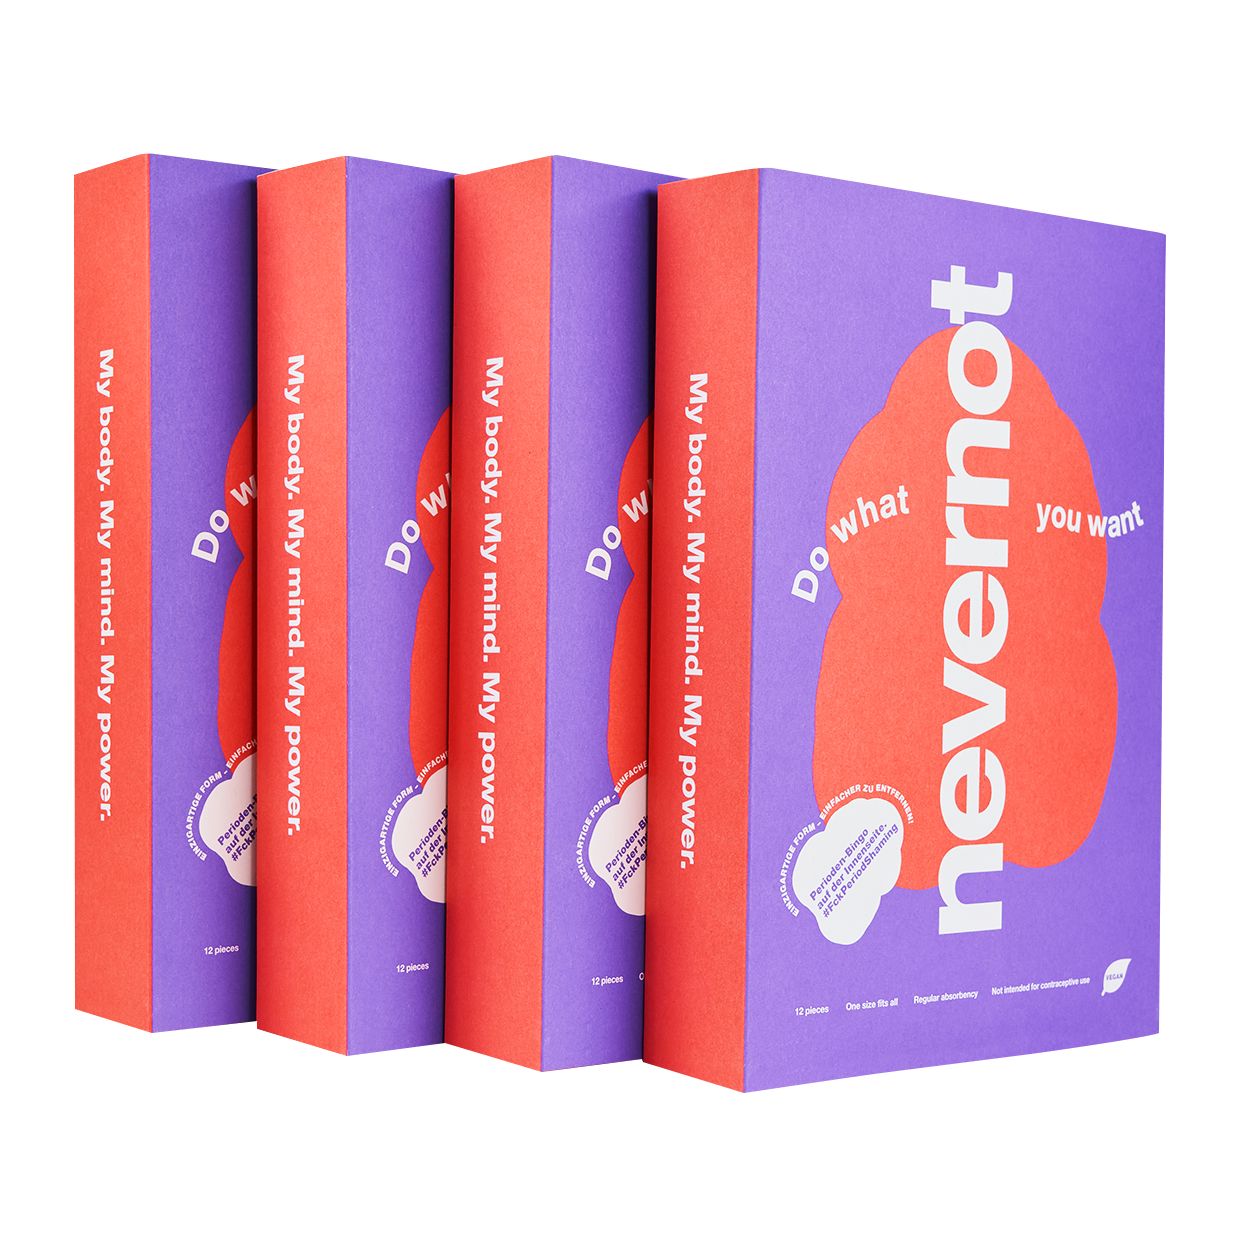 nevernot Soft-Tampons - XXL Pack